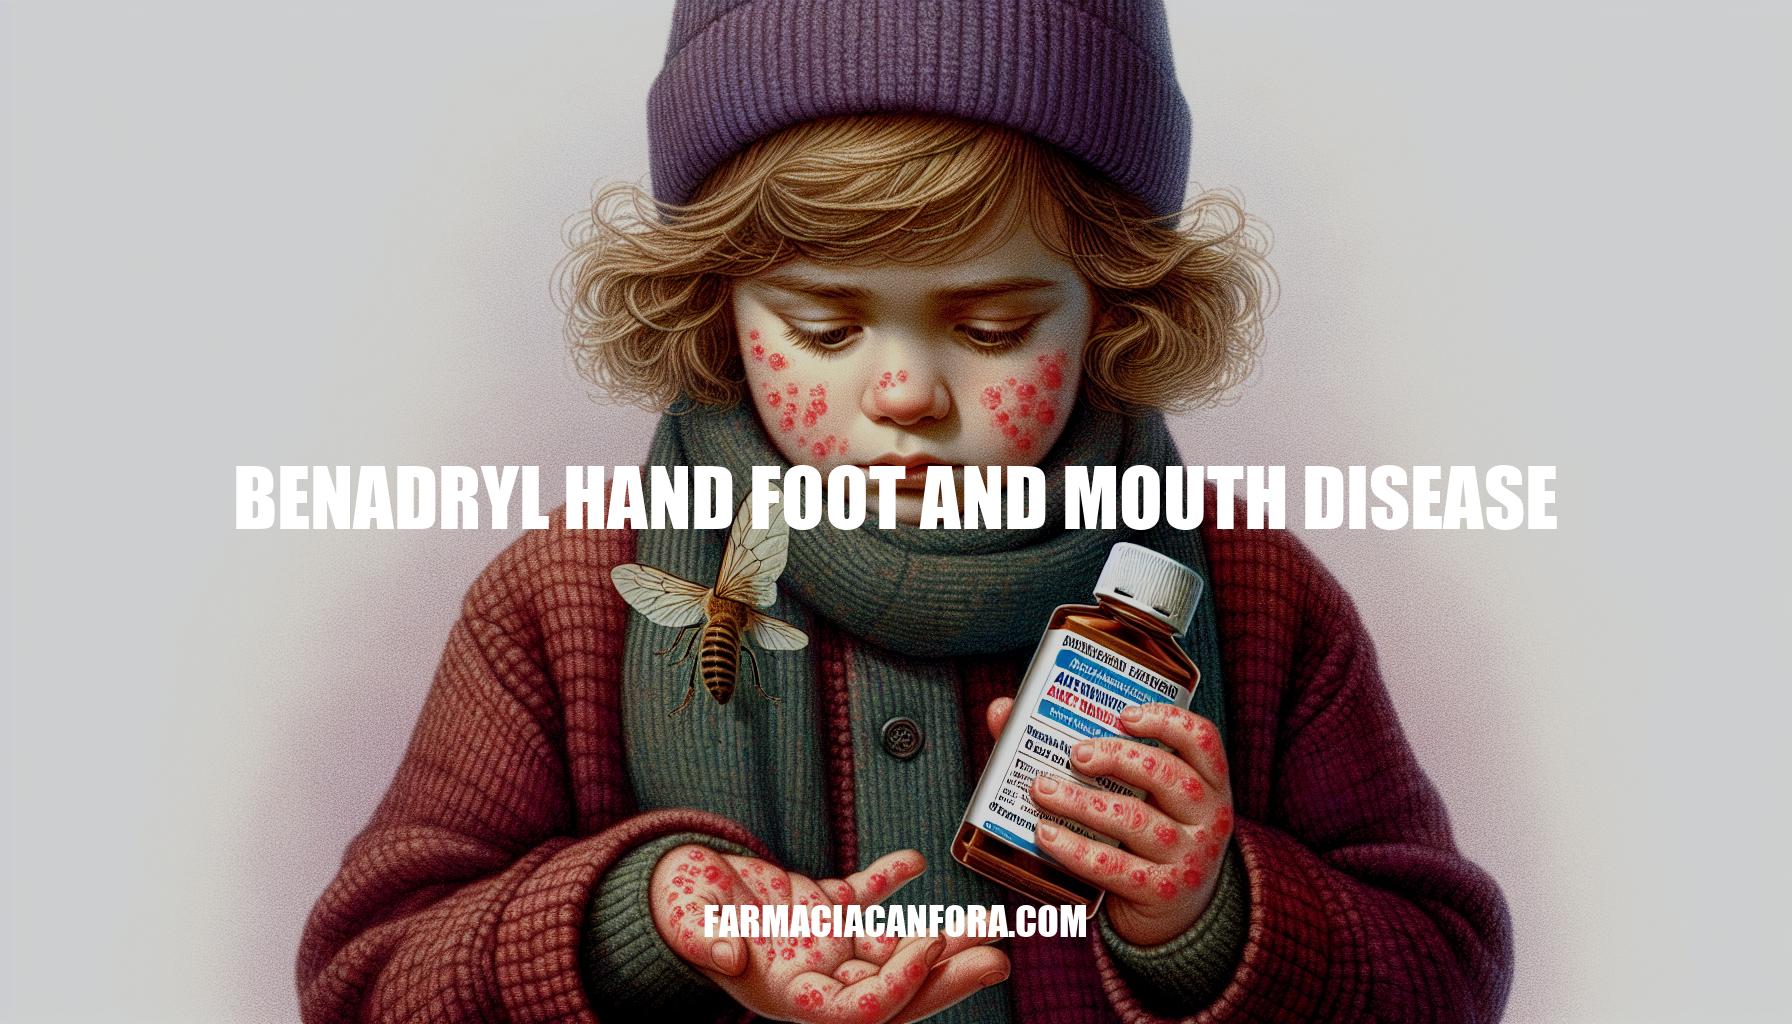 Managing Hand, Foot, and Mouth Disease with Benadryl